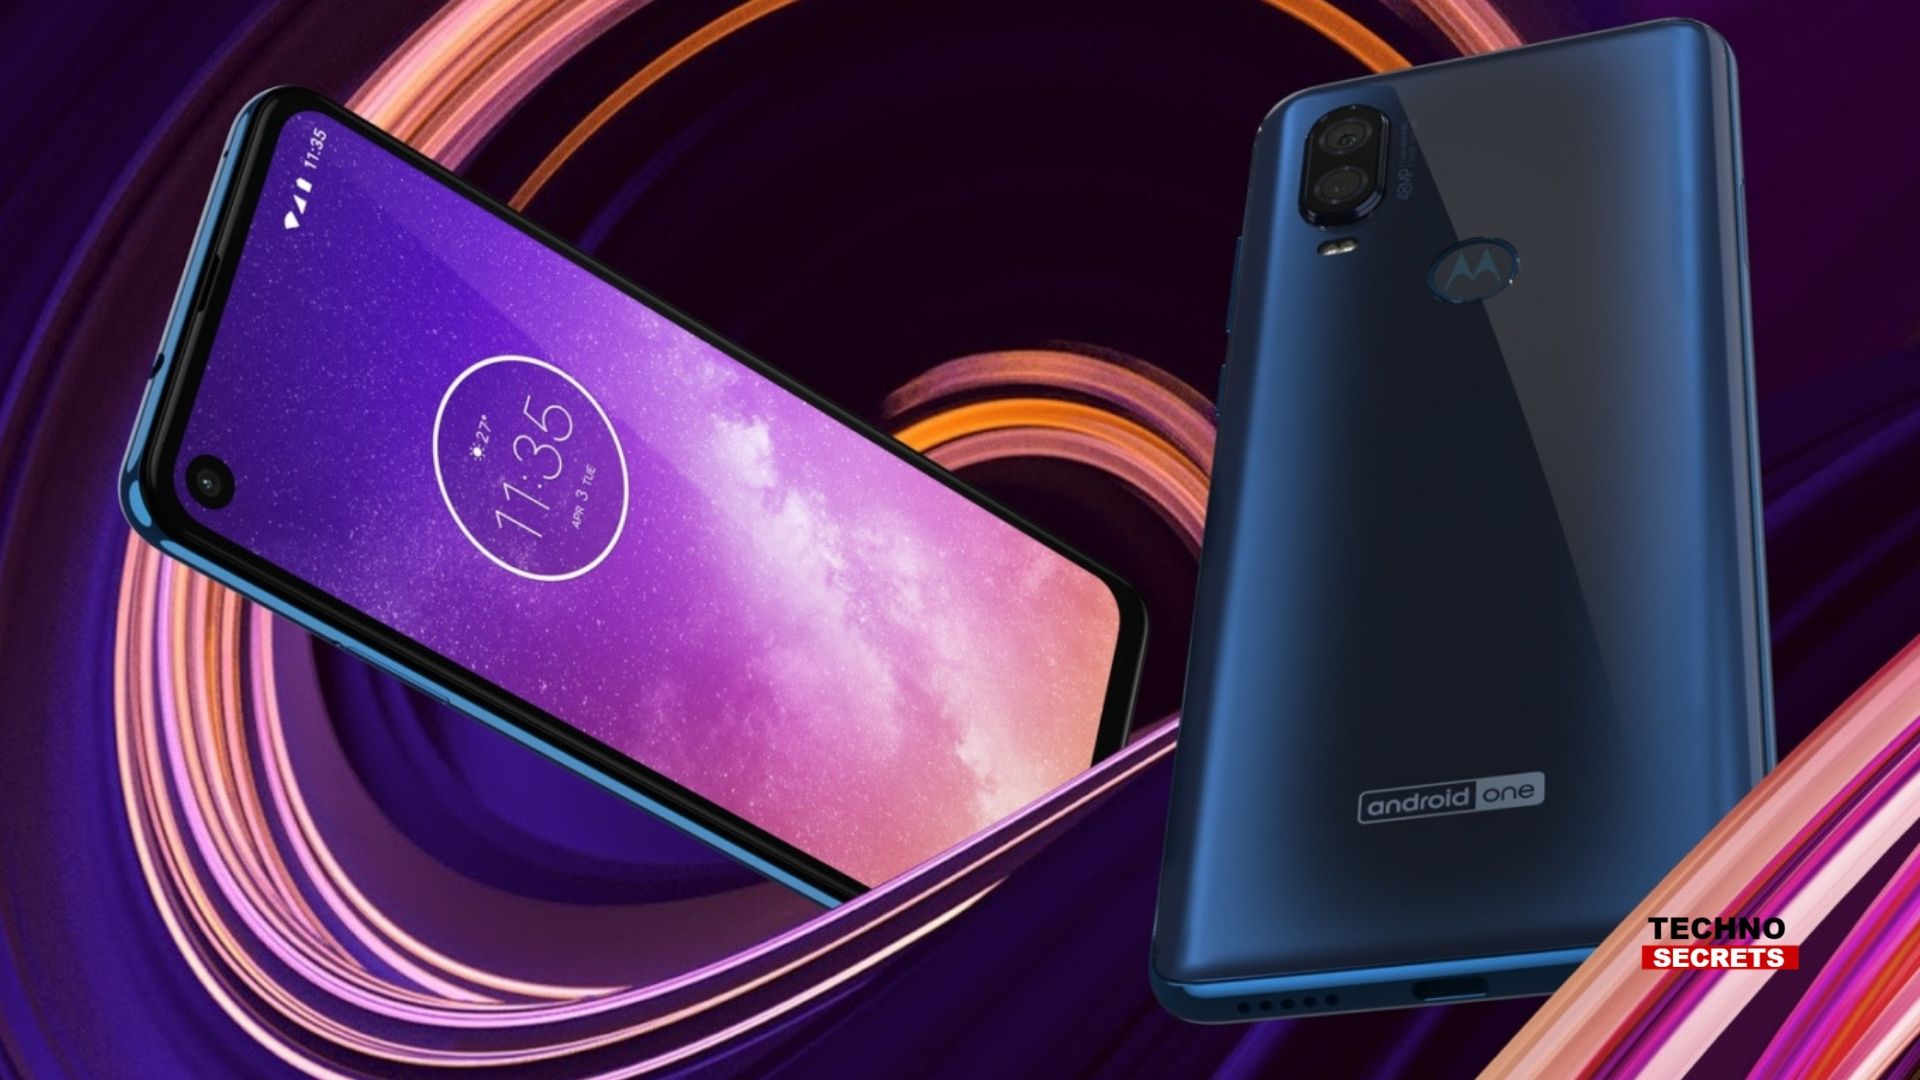 Motorola One Action With Ultra-wide Lens Camera Launched in India